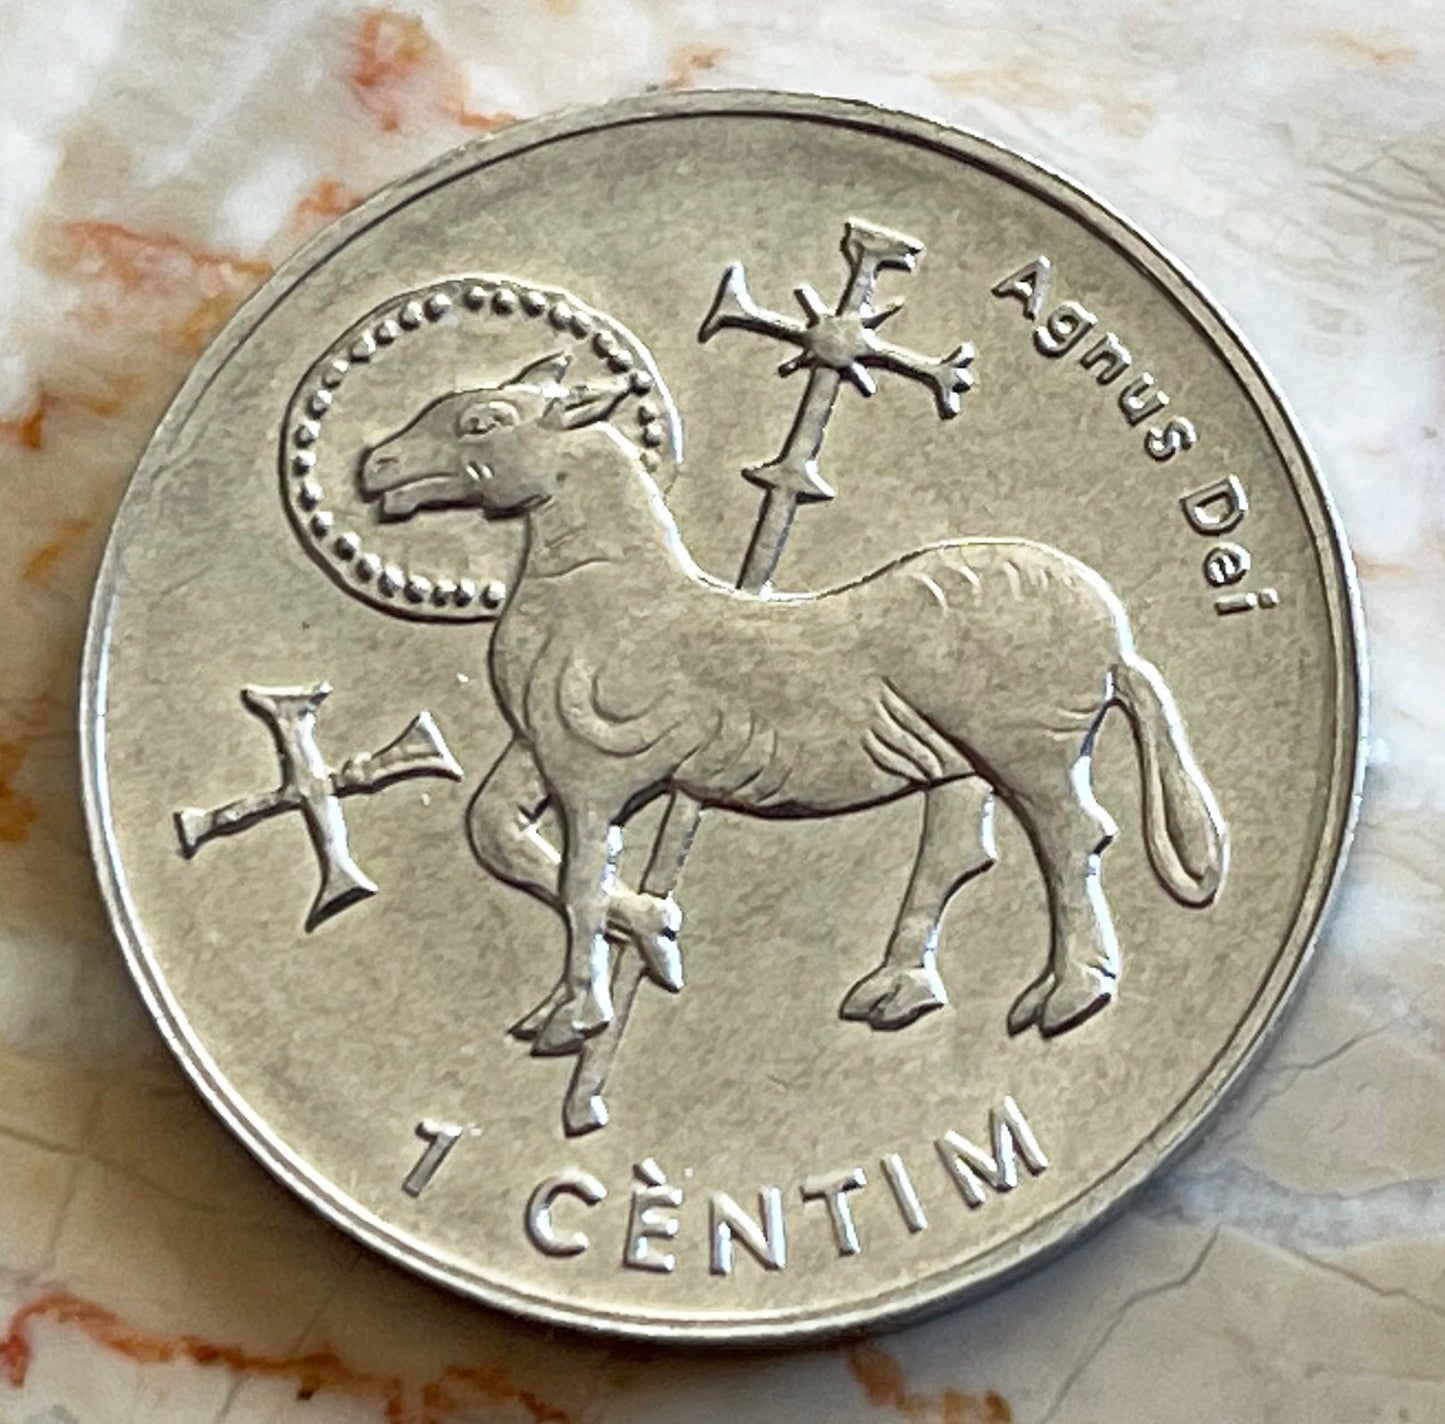 Agnus Dei Lamb of God Andorra 1 Centim Authentic Coin Money for Jewelry and Craft Making 2002